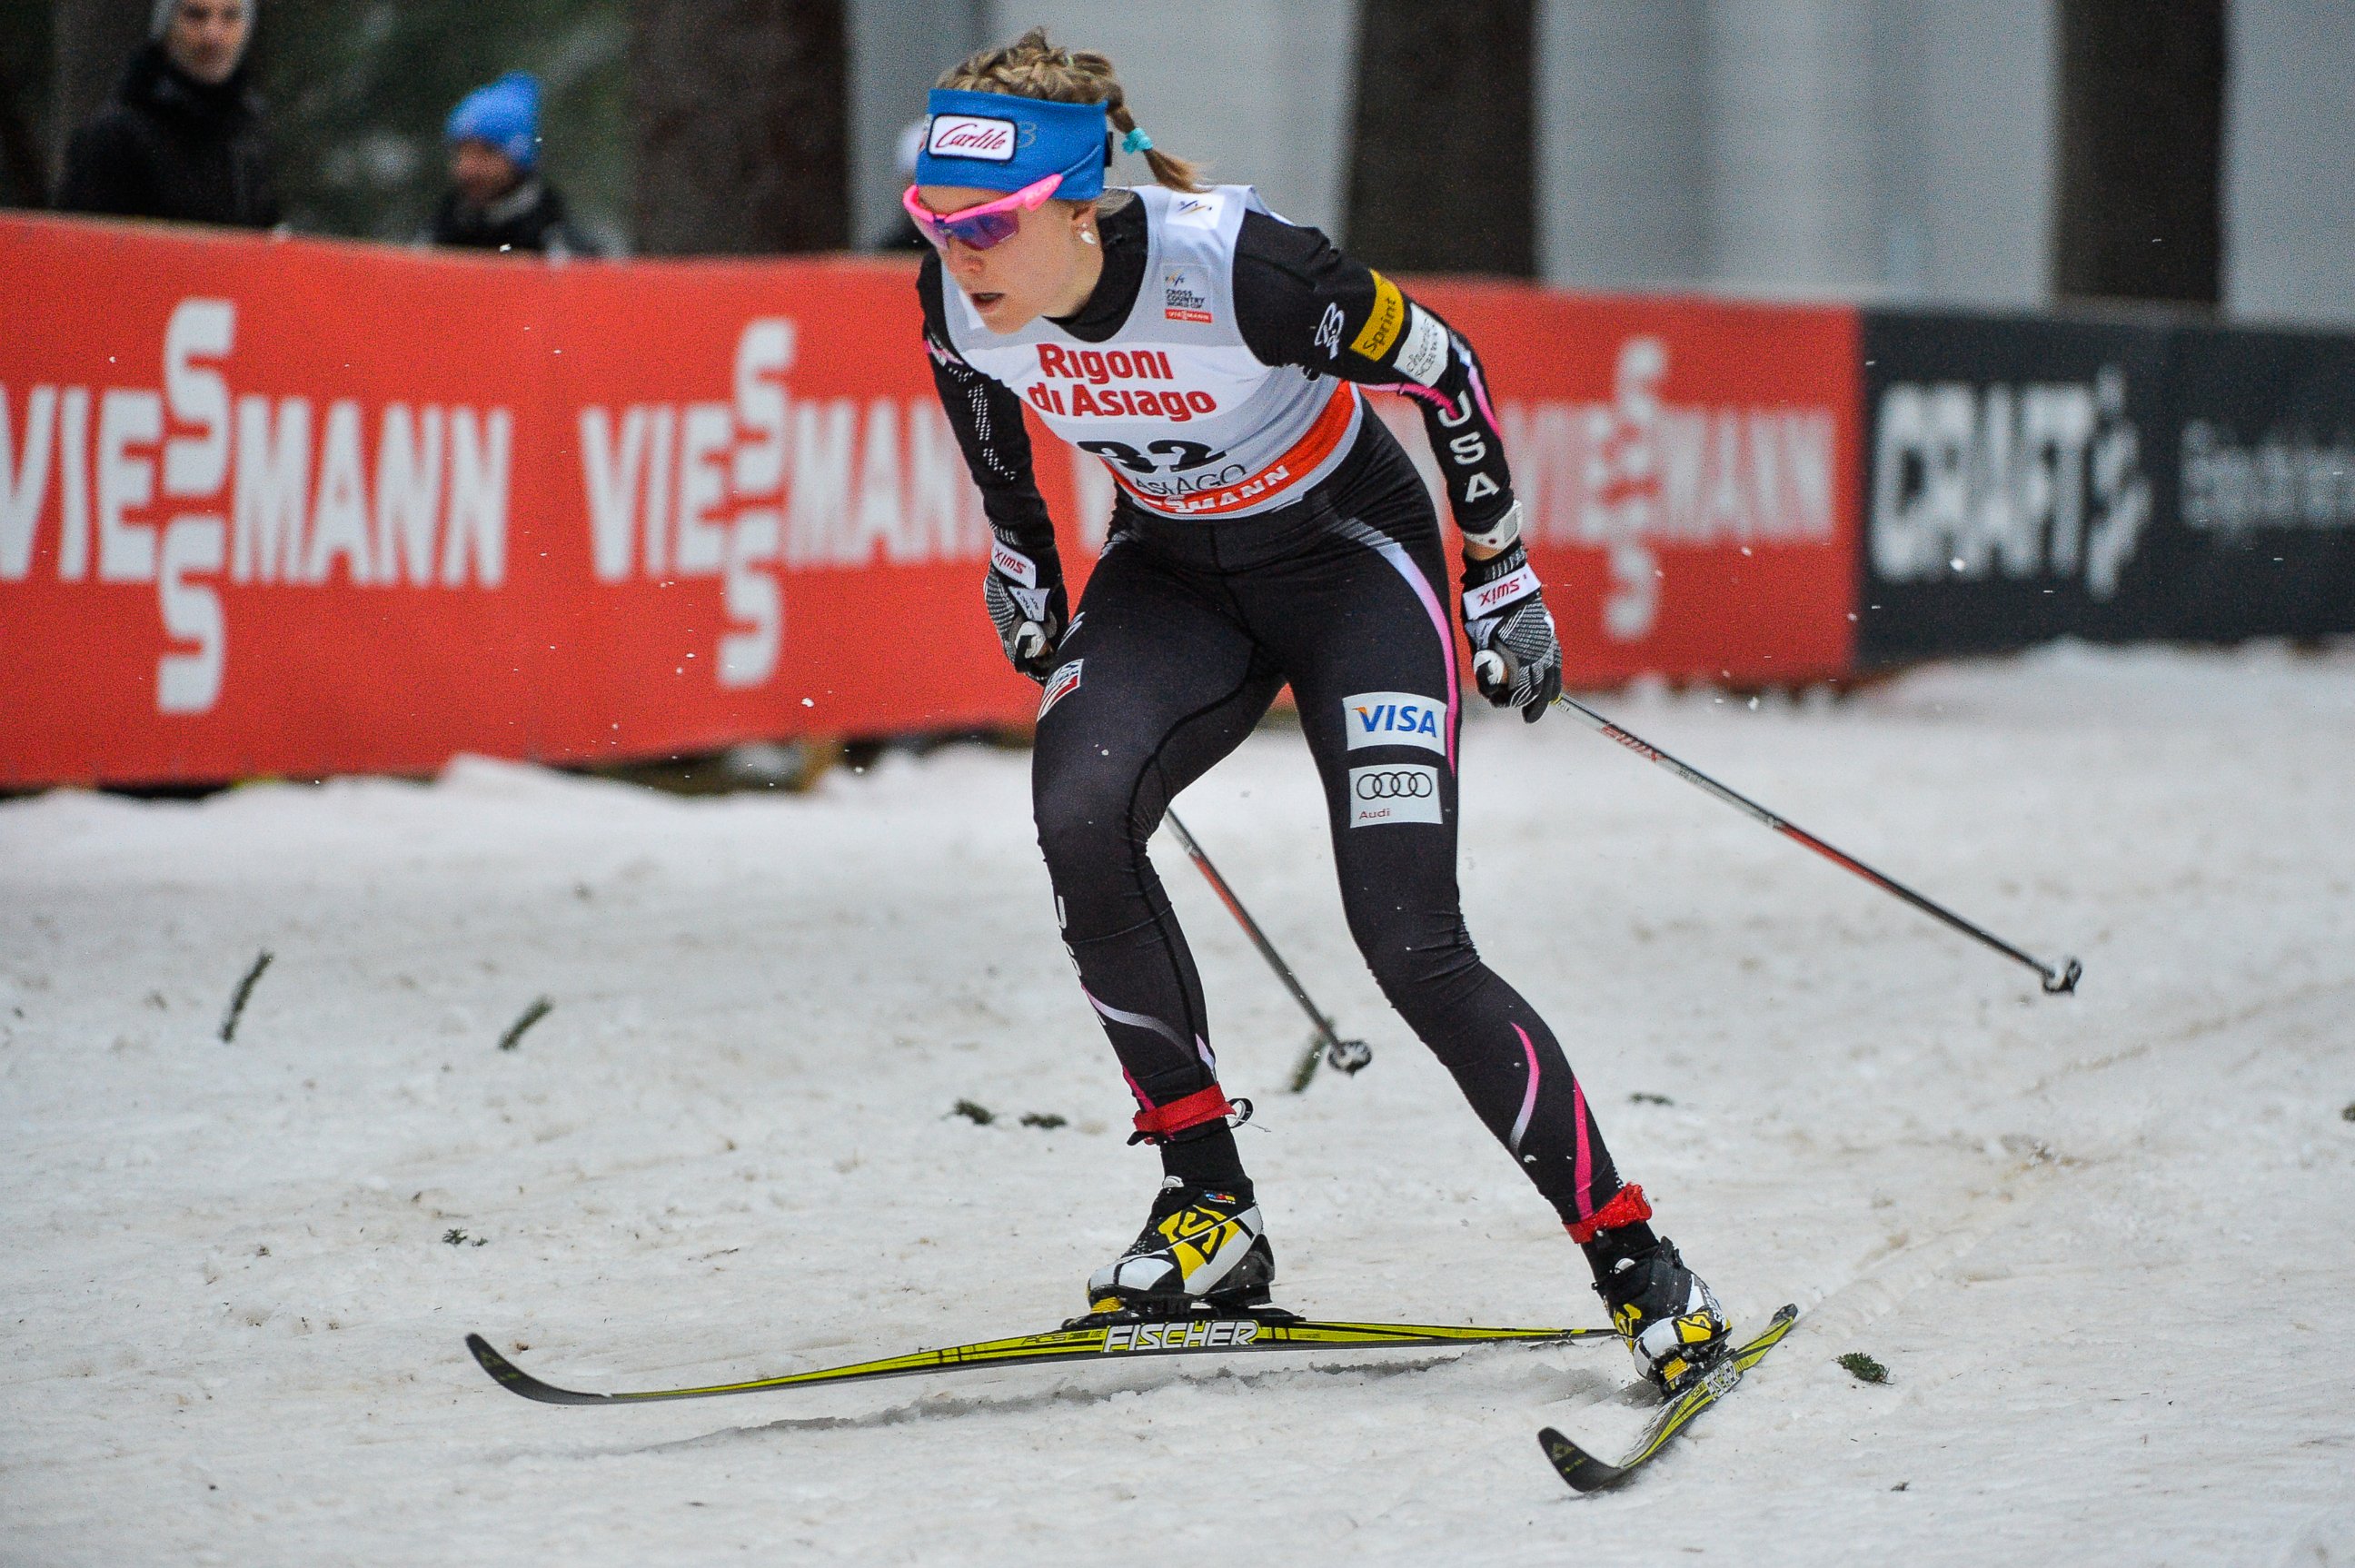 Athletes to Watch in Sochi The 2014 Olympics Breakout Stars